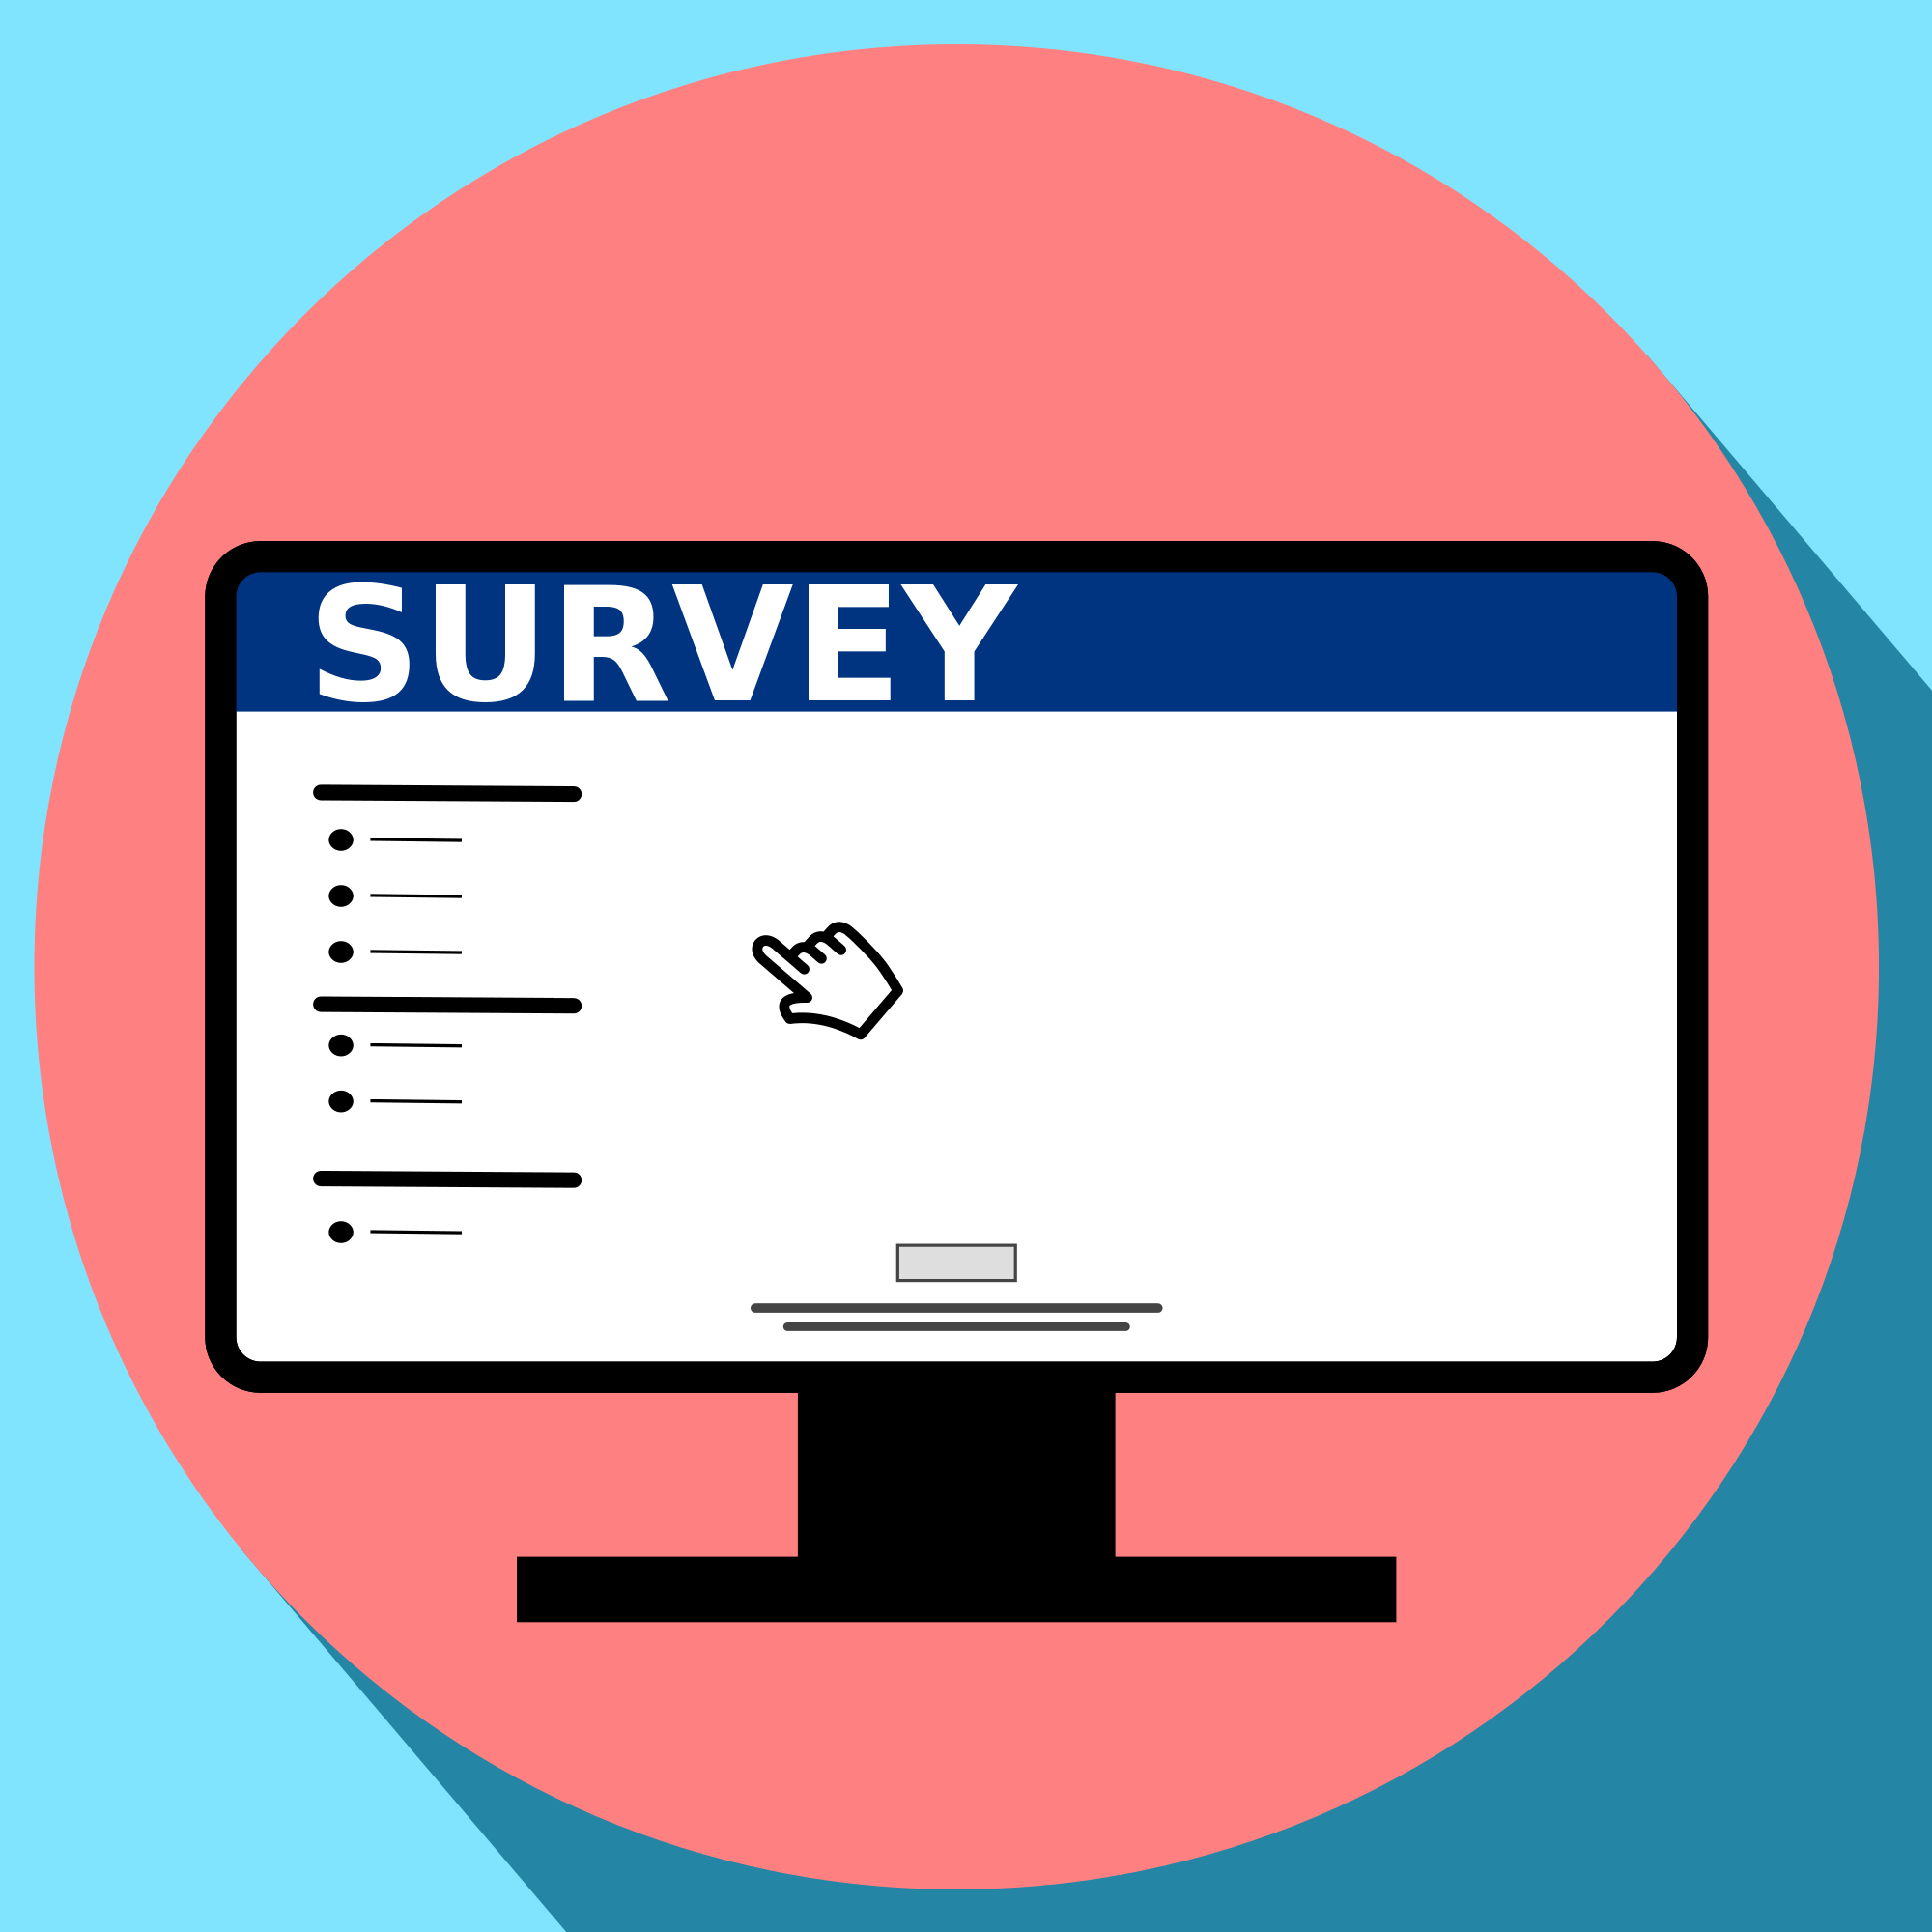 Graphic of survey on computer screen within a solid pink circle within a solid light blue square